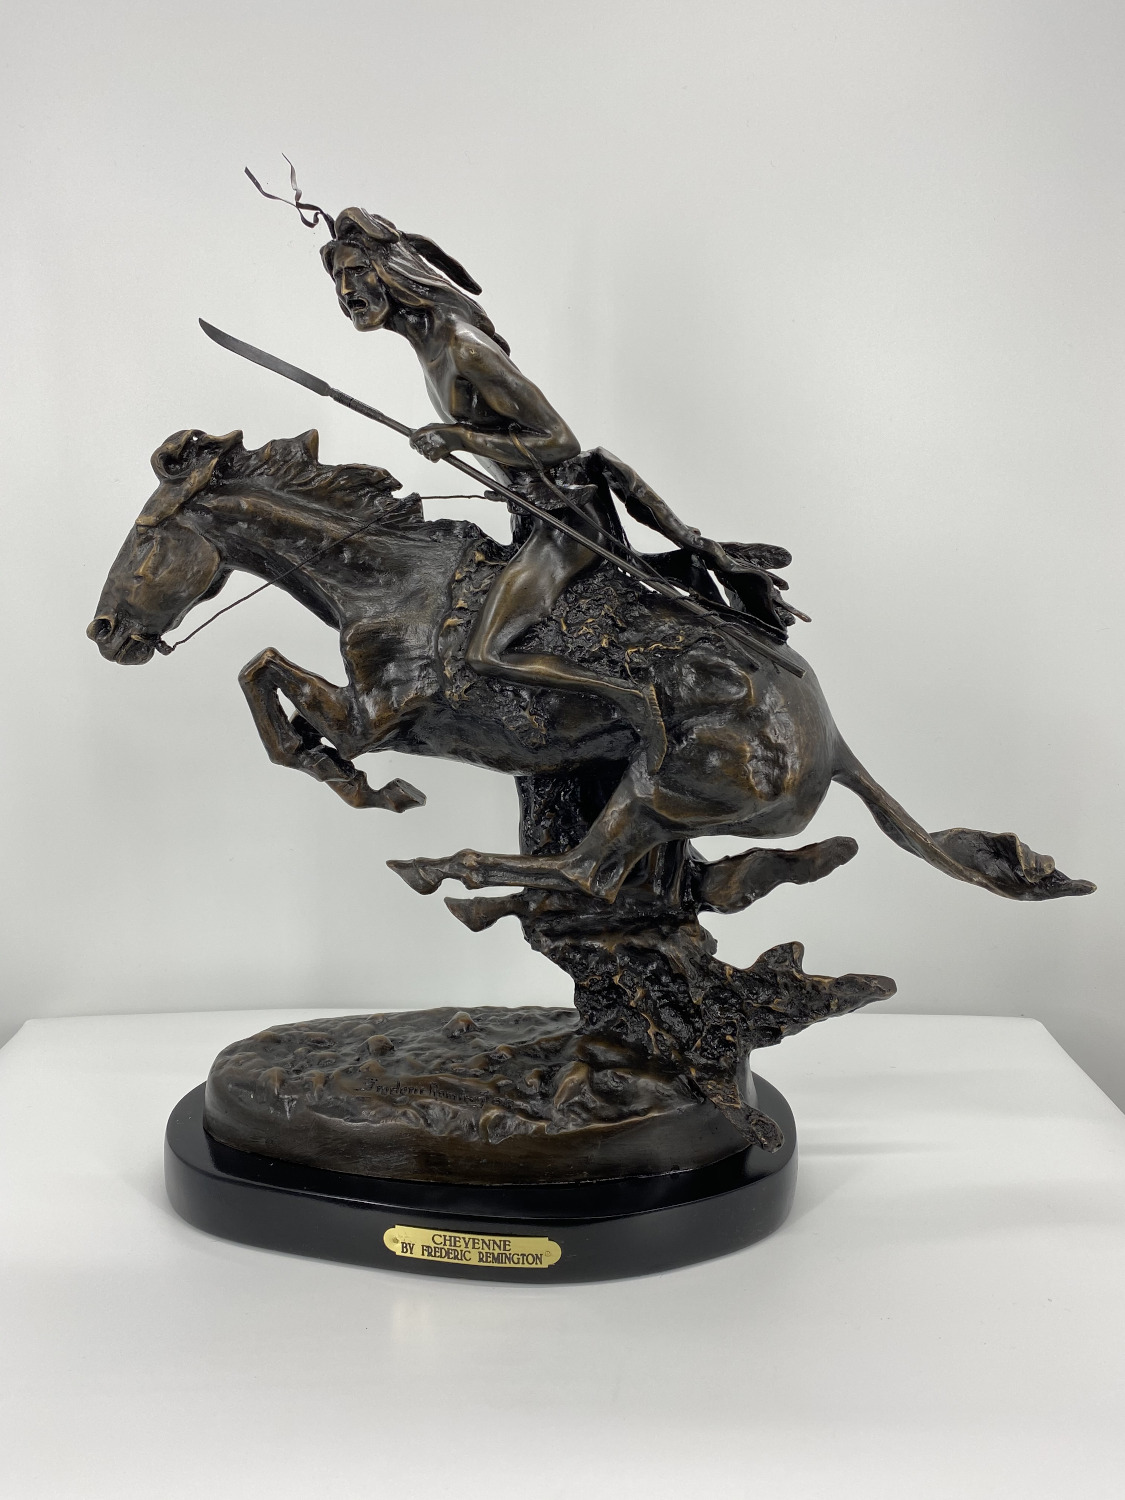 Frederic Remington Solid American Bronze Statue "Cheyenne" baby size 8"H x 8"L x 3.5"W - image 1 of 6